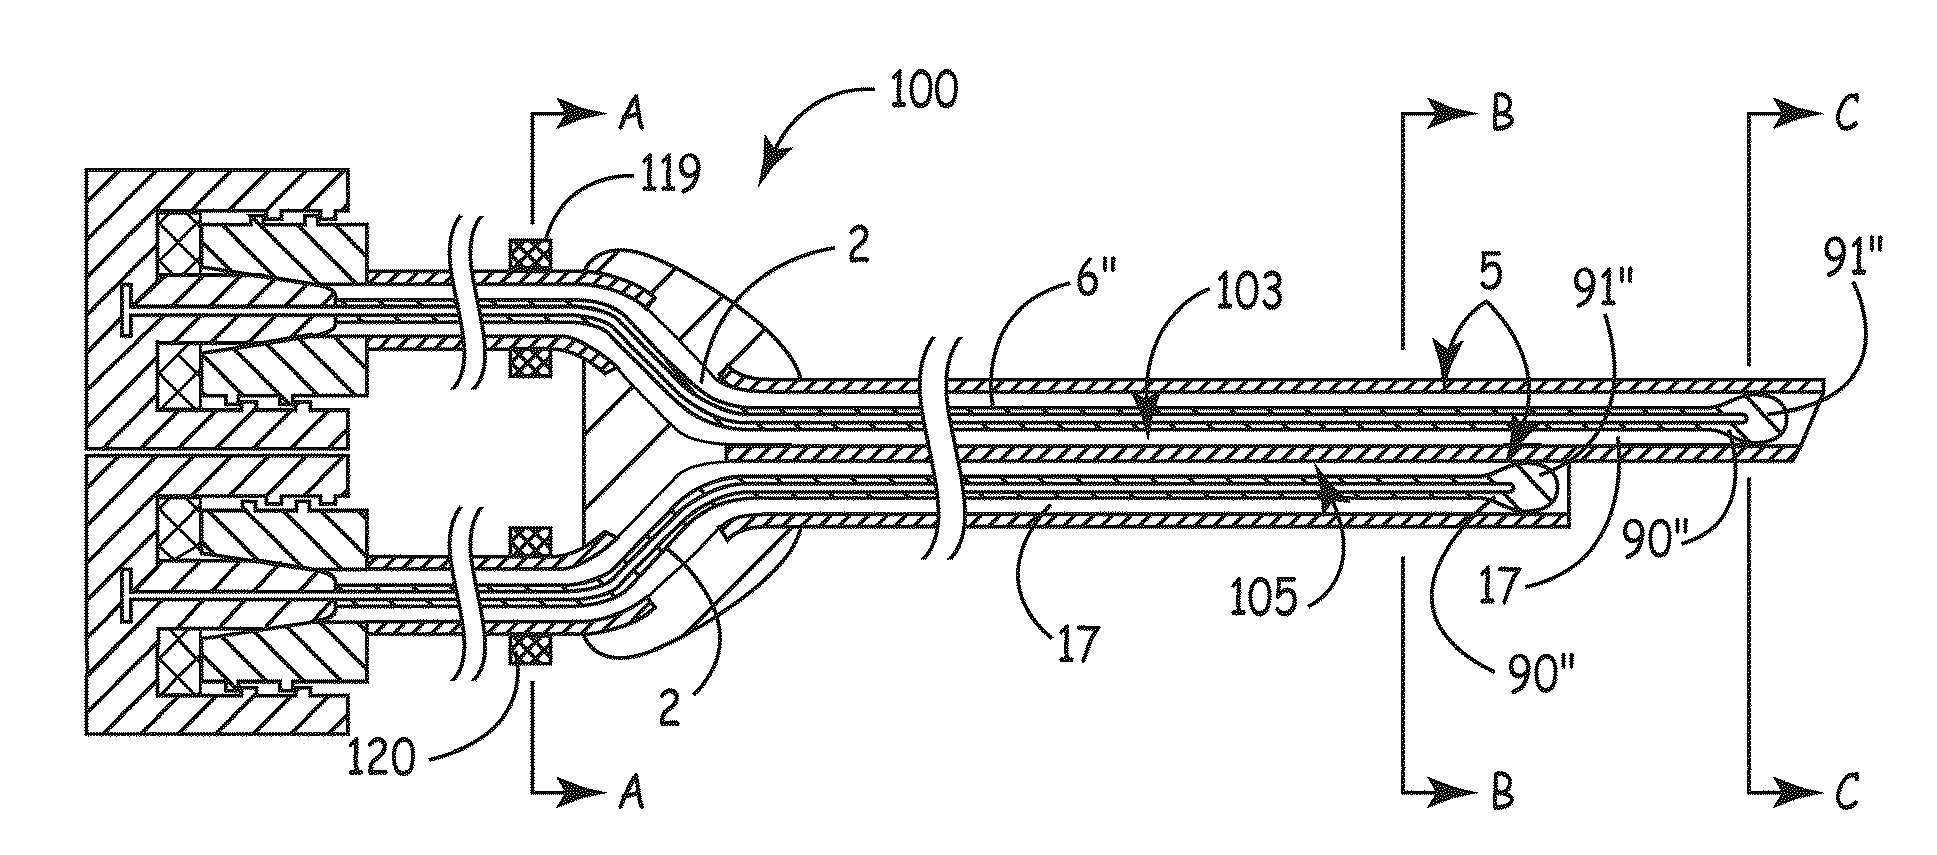 Device for delivery of antimicrobial agent into trans-dermal catheter